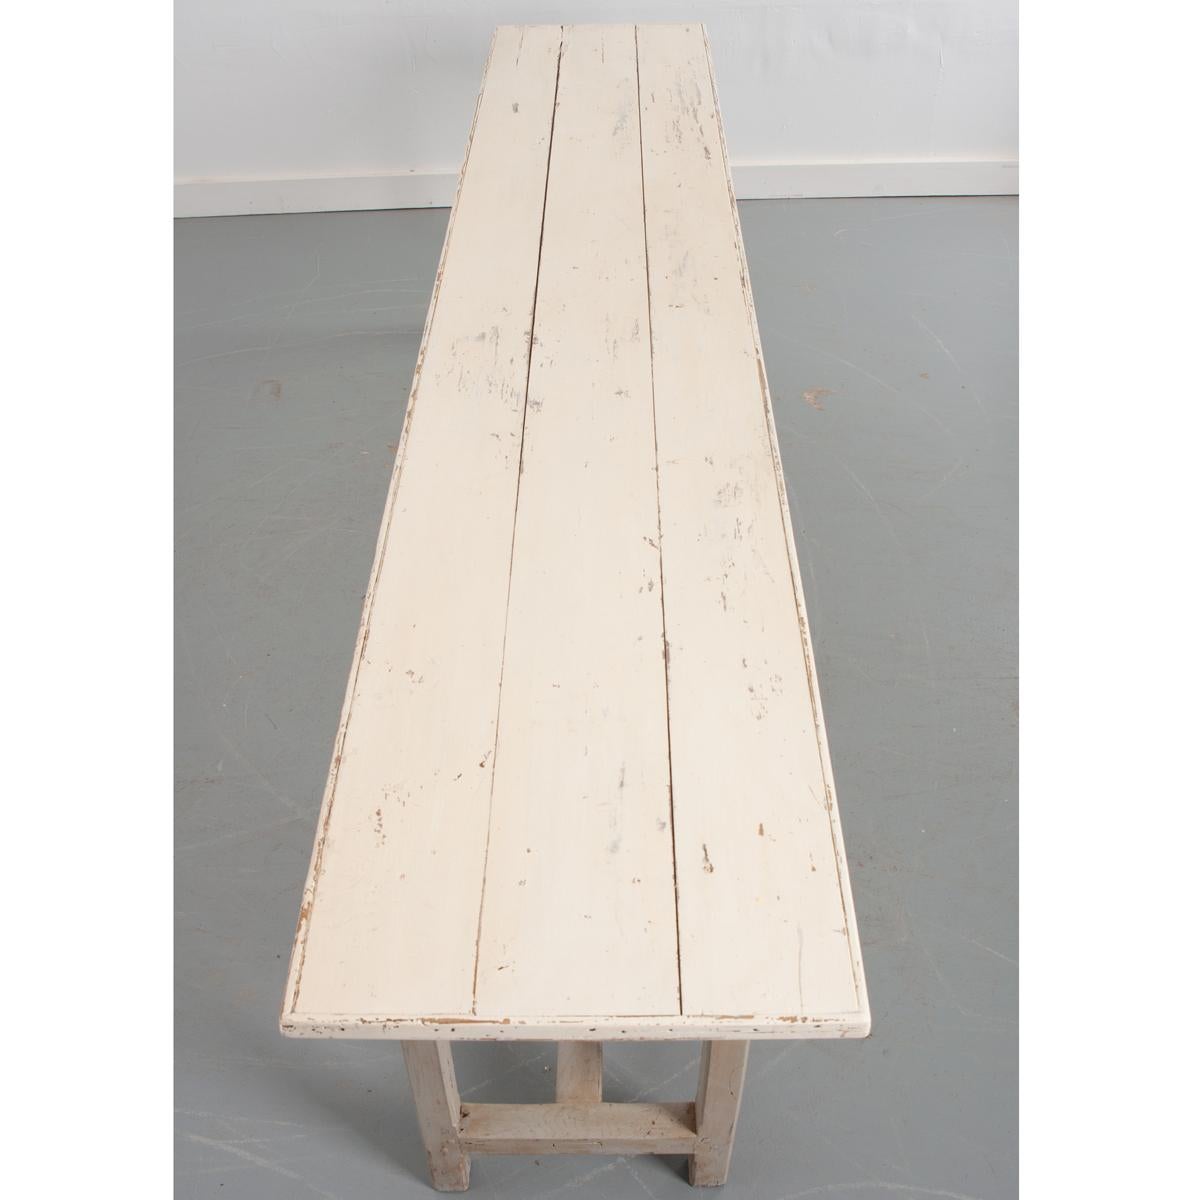 This long, narrow table is from France and is over nine feet long! It is from the 19th century, with recent paint. The top is off white and the base is light grayish-green. The legs are simple and straight with a ‘H’ shape stretcher connecting the